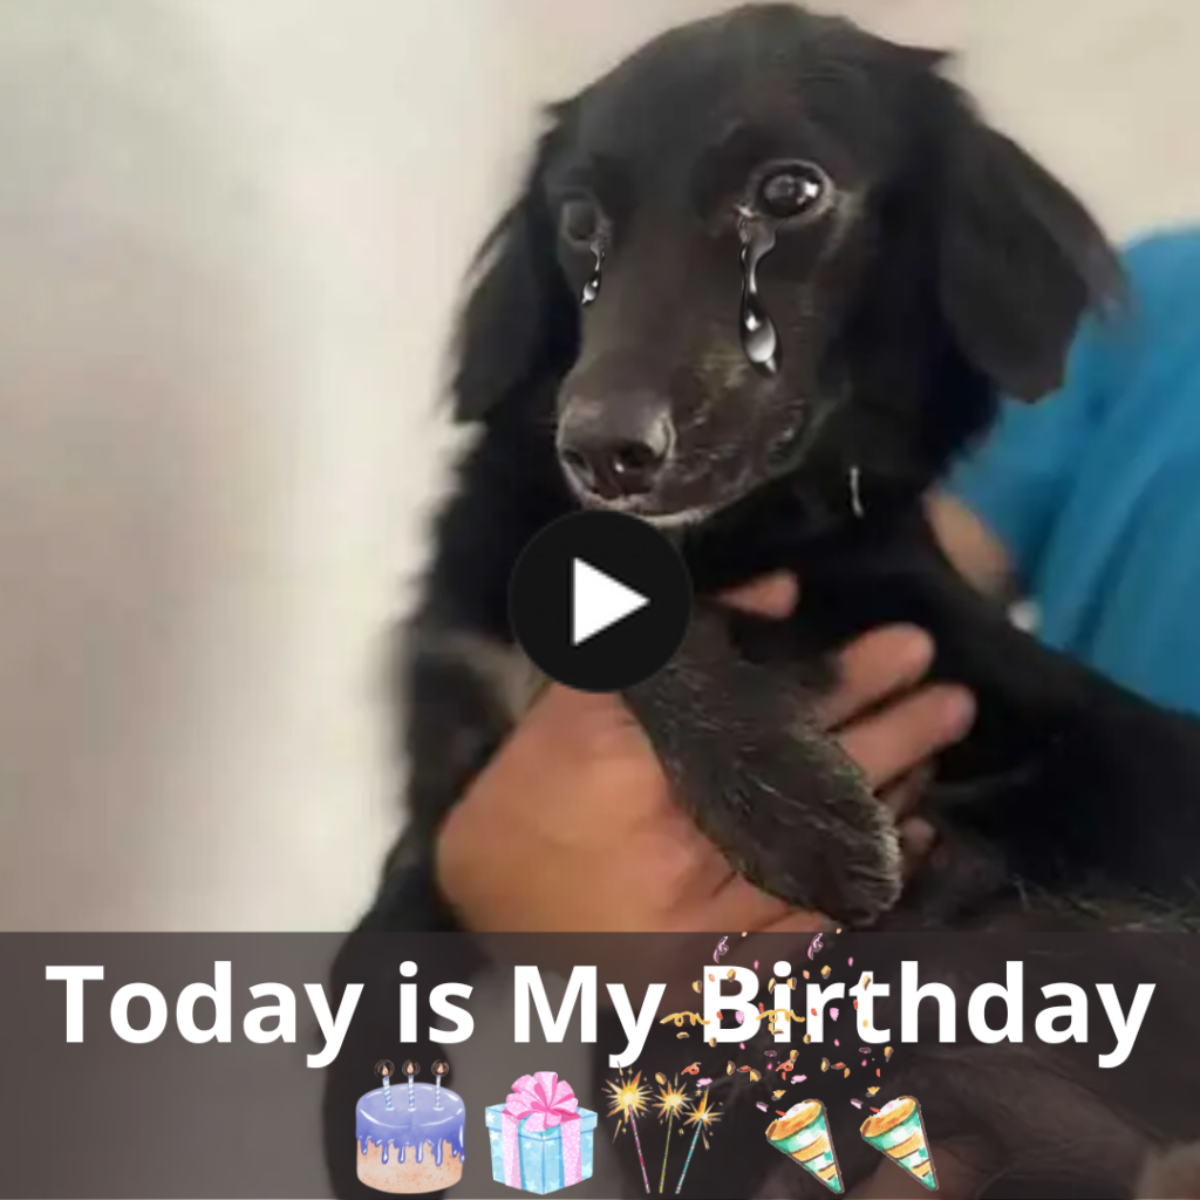 Today marks the birthday of a stray dog that was discovered sick and hungry in a garbage can and was pleading for assistance in finding a place to stay.